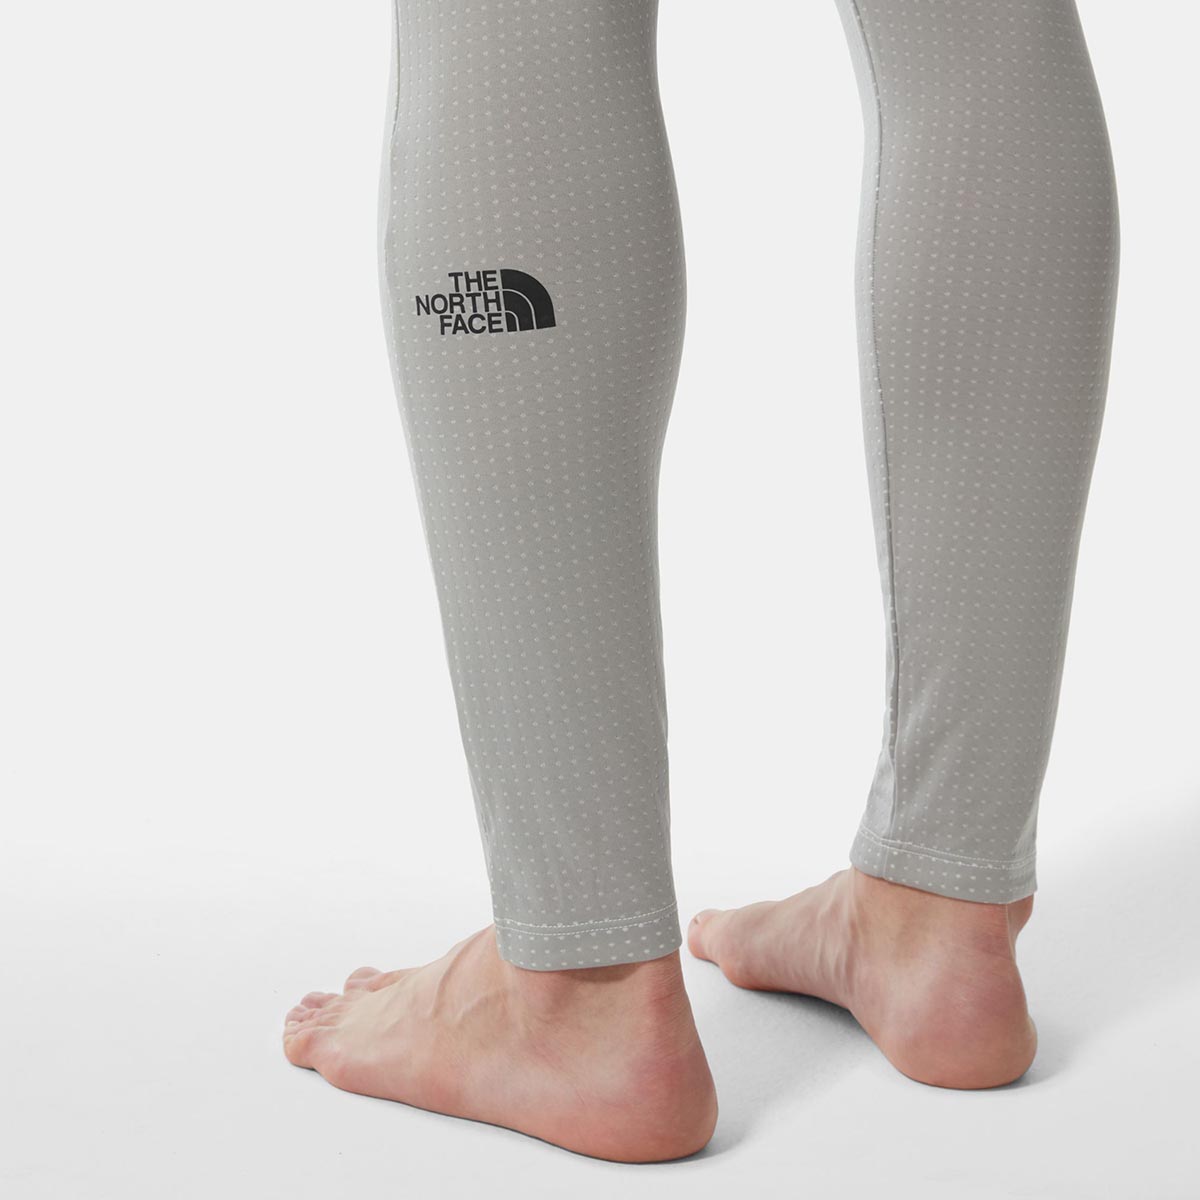 THE NORTH FACE - DOTKNIT BASELAYER TIGHTS